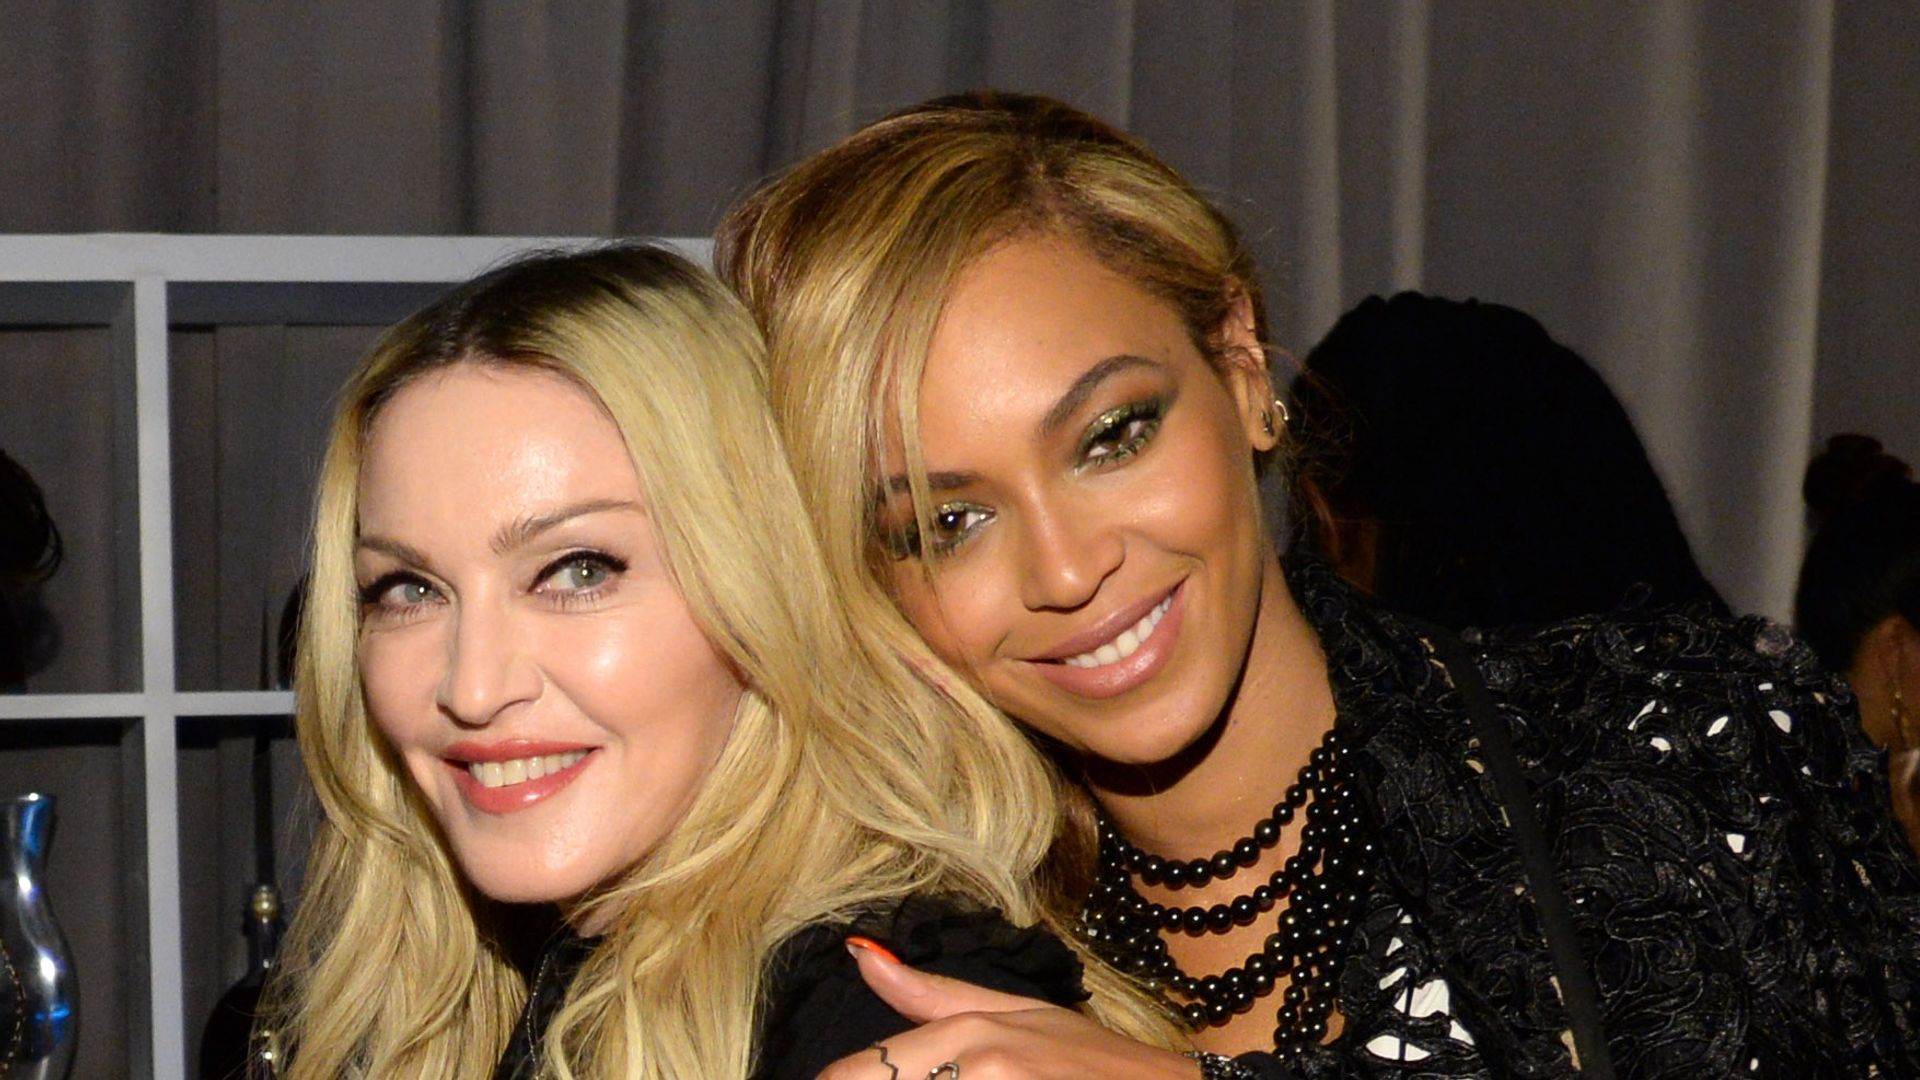 Madonna and Beyonce attend the Tidal launch event #TIDALforALL at Skylight at Moynihan Station on March 30, 2015 in New York City